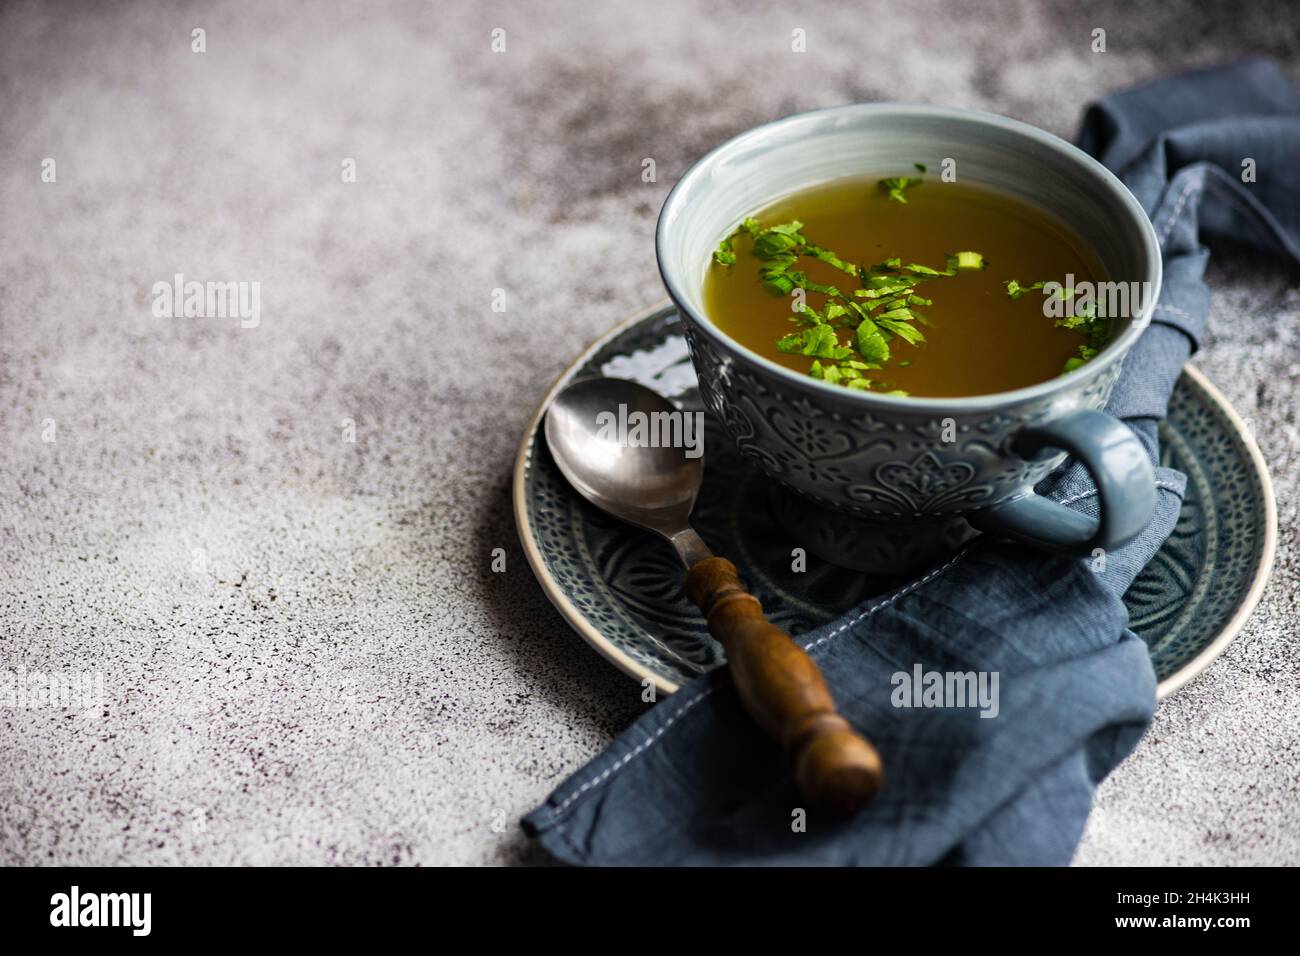 Bowl of healthy chicken broth with parsley Stock Photo